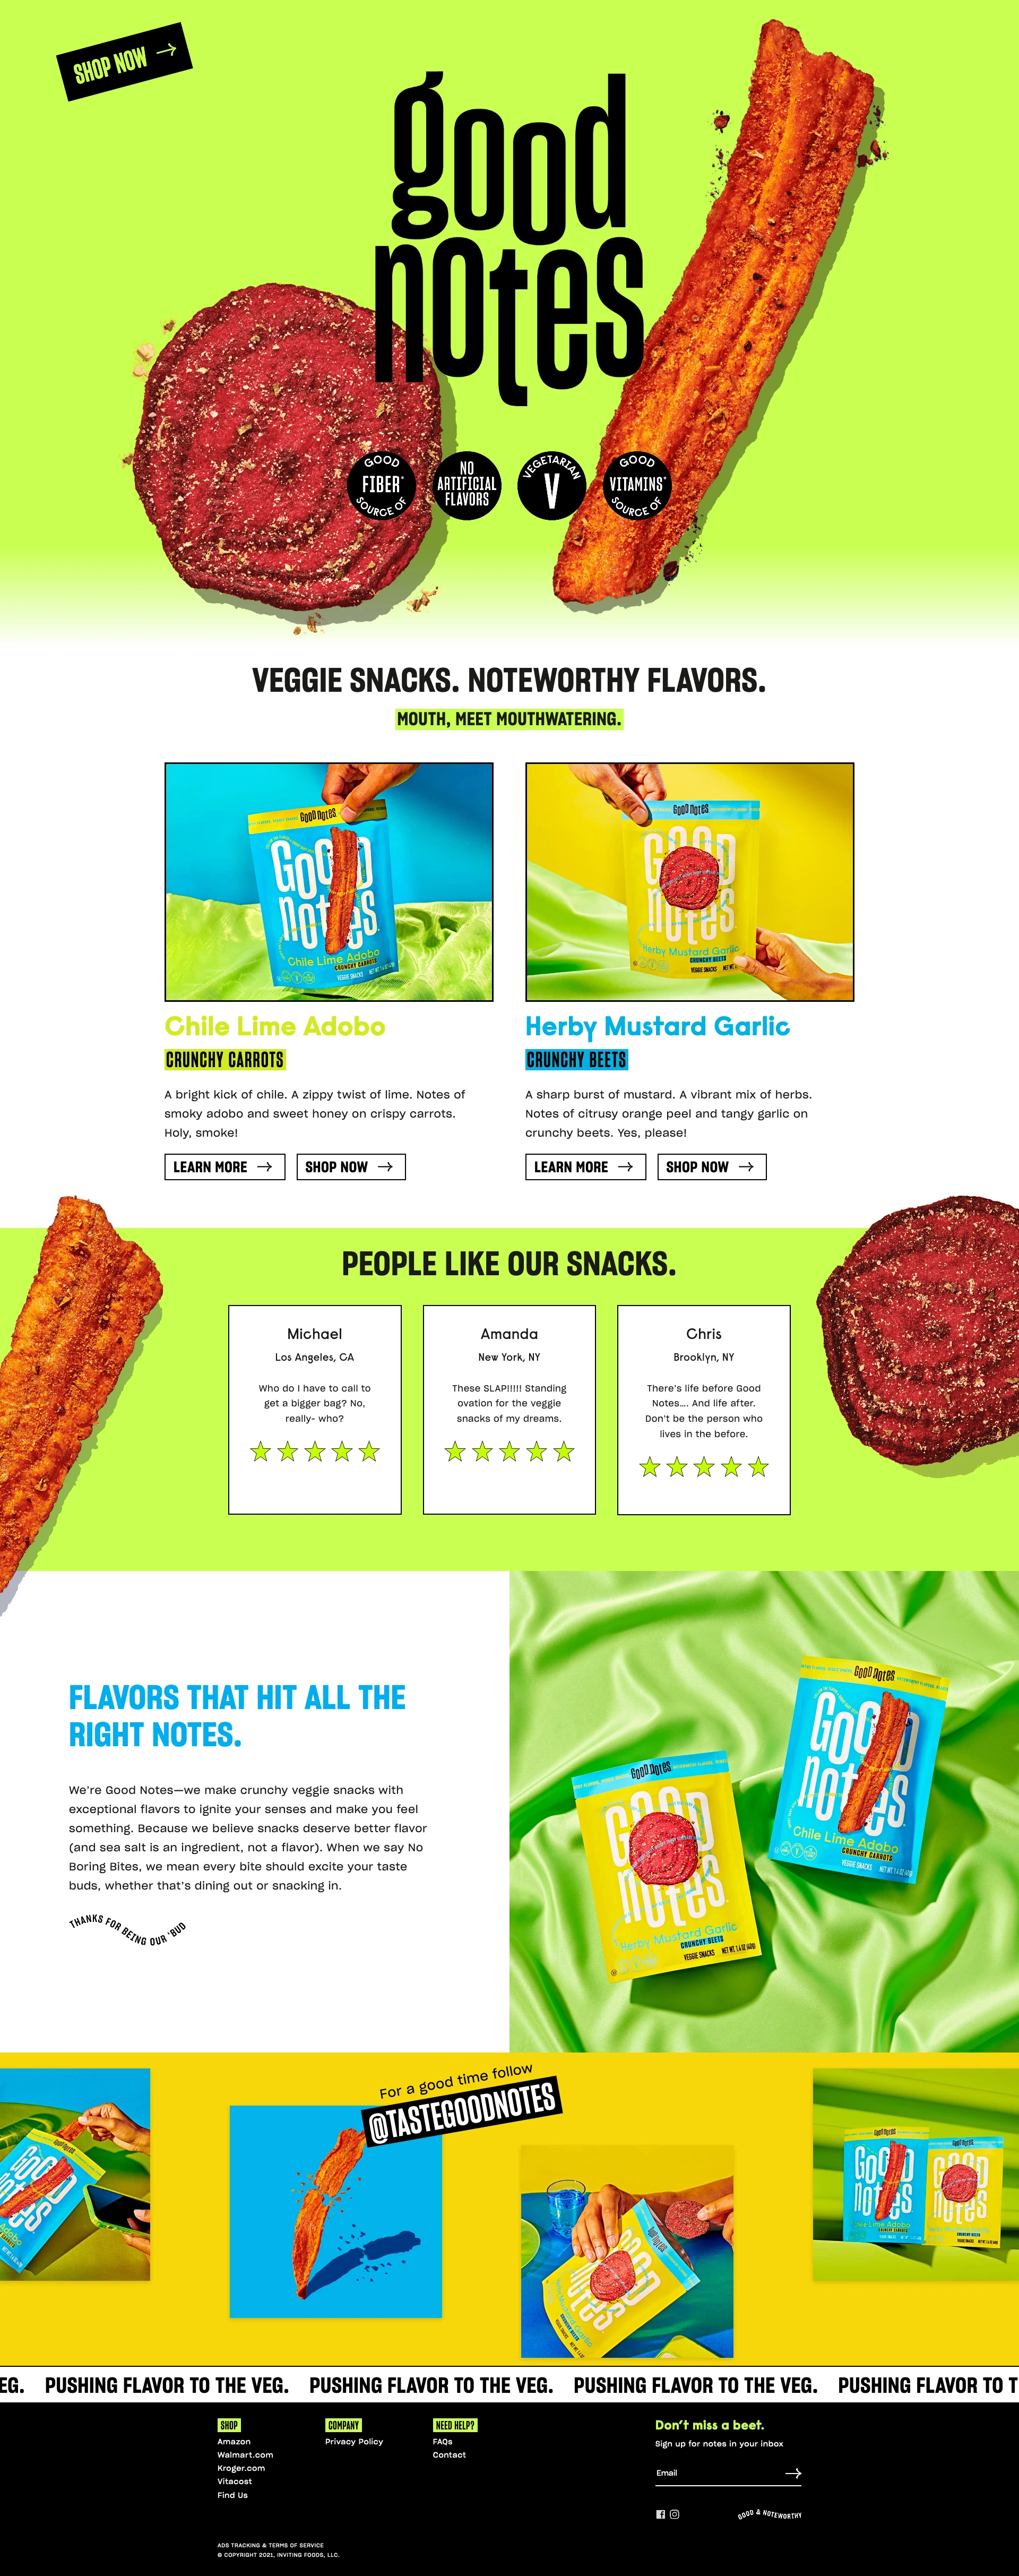 Taste Good Notes Landing Page Example: We’re Good Notes—we make crunchy veggie snacks with exceptional flavors to ignite your senses and make you feel something. Crunchy Veggie Snacks with flavors so bold and complex they'll have you saying yes, please!